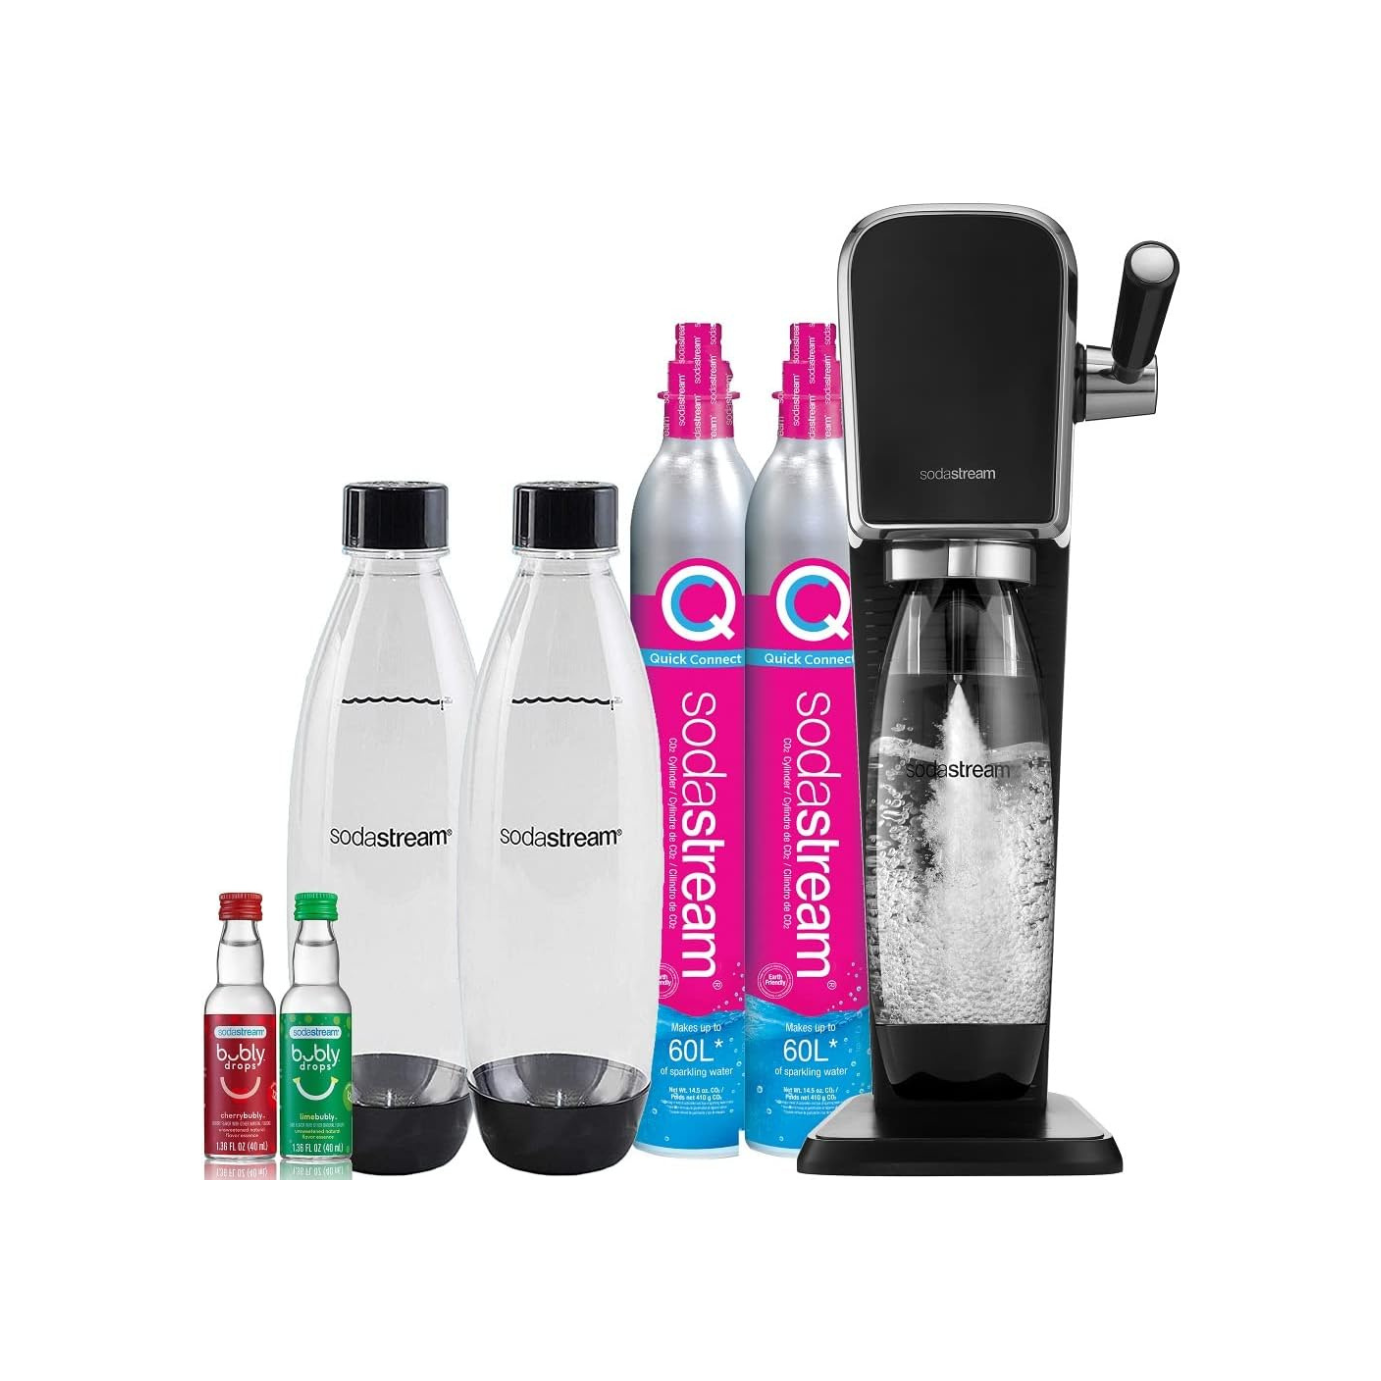 SodaStream Art Sparkling Water Maker Bundle, with CO2, DWS Bottles, and Bubly Drops Flavors